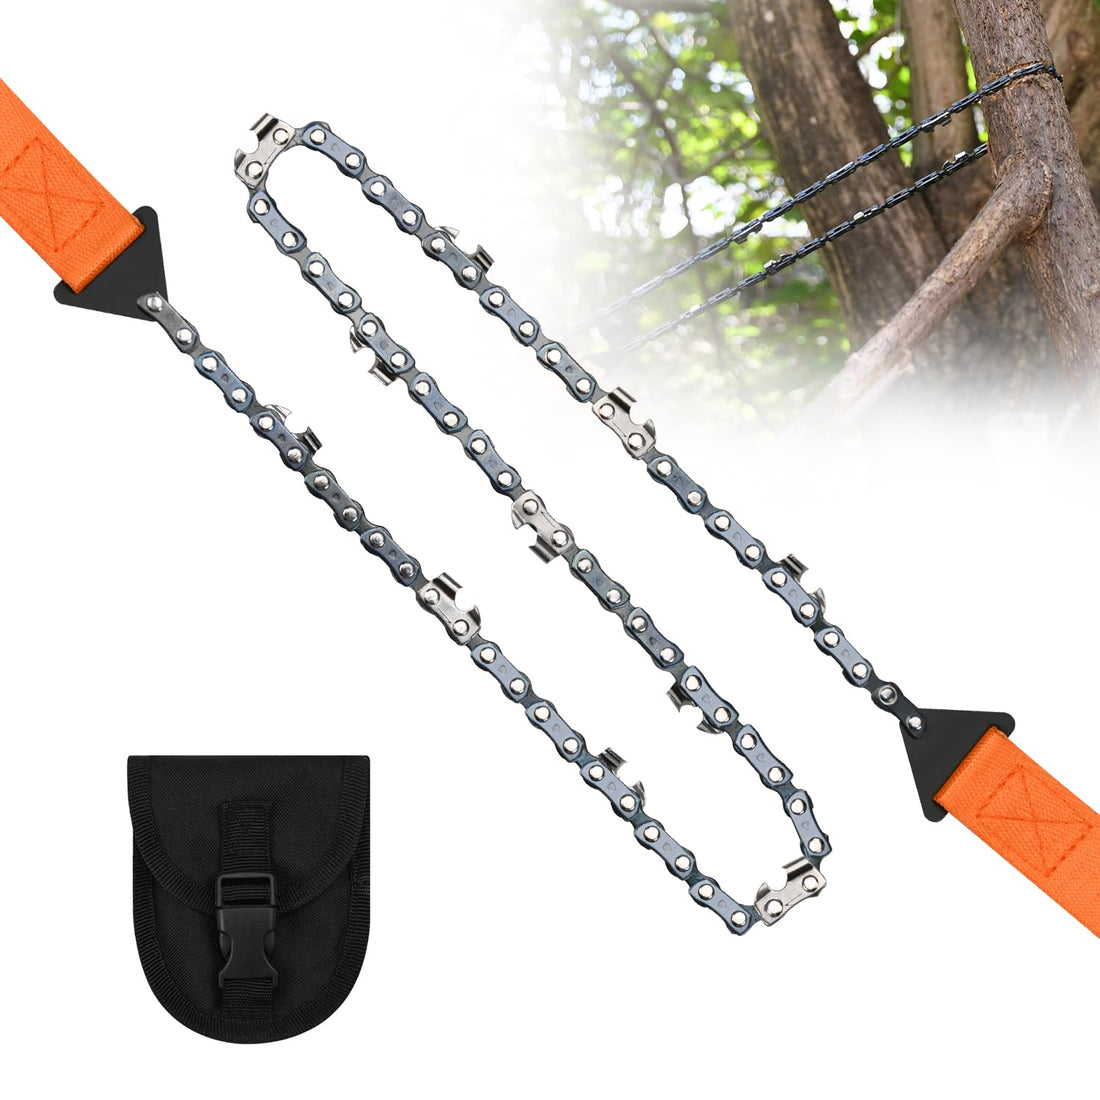 Pocket Chainsaw, 24in Pocket Rope Saw, Folding Chain Hand Saw with Carry Pouch, for Outdoor Survival Camping, Hunting, Hiking, Cutting Wood(24in)